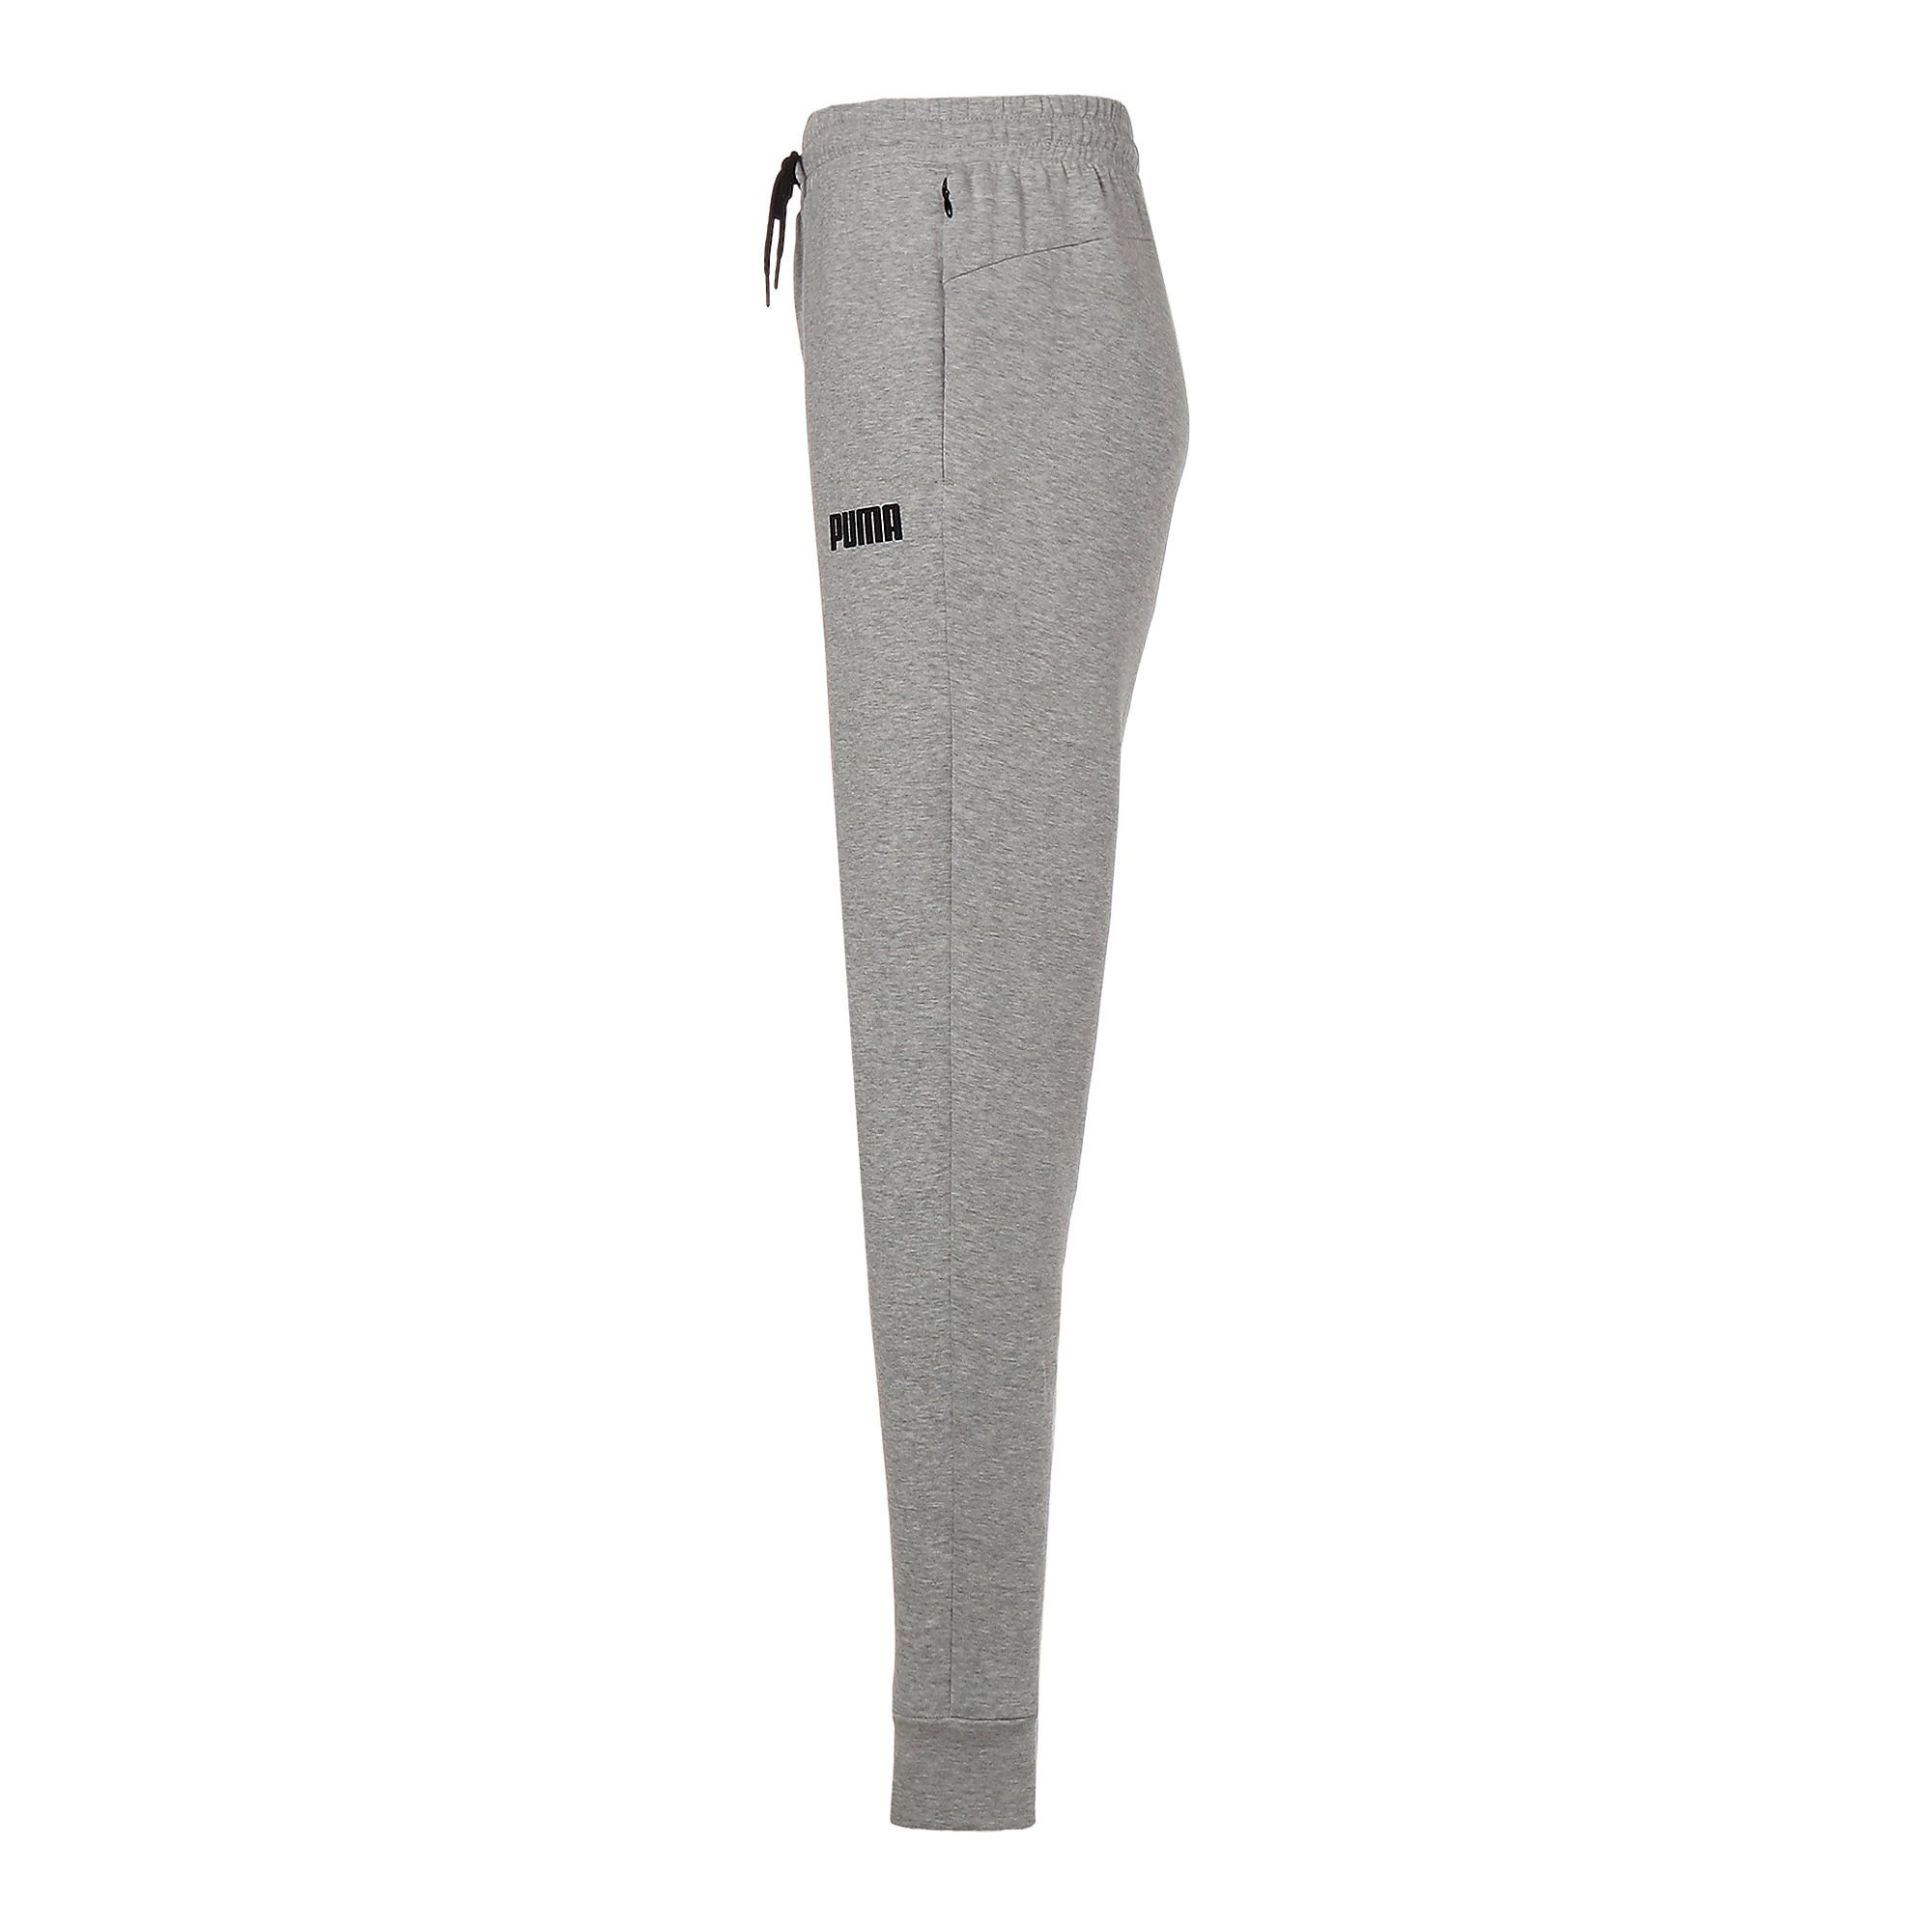  Perfect for relaxing at home or heading out, the SPACER Pants will keep you dry and fresh, thanks to their moisture-wicking material. DETAILS Regular fitComfortable style by PUMAPUMA branding detailsSignature PUMA design elements